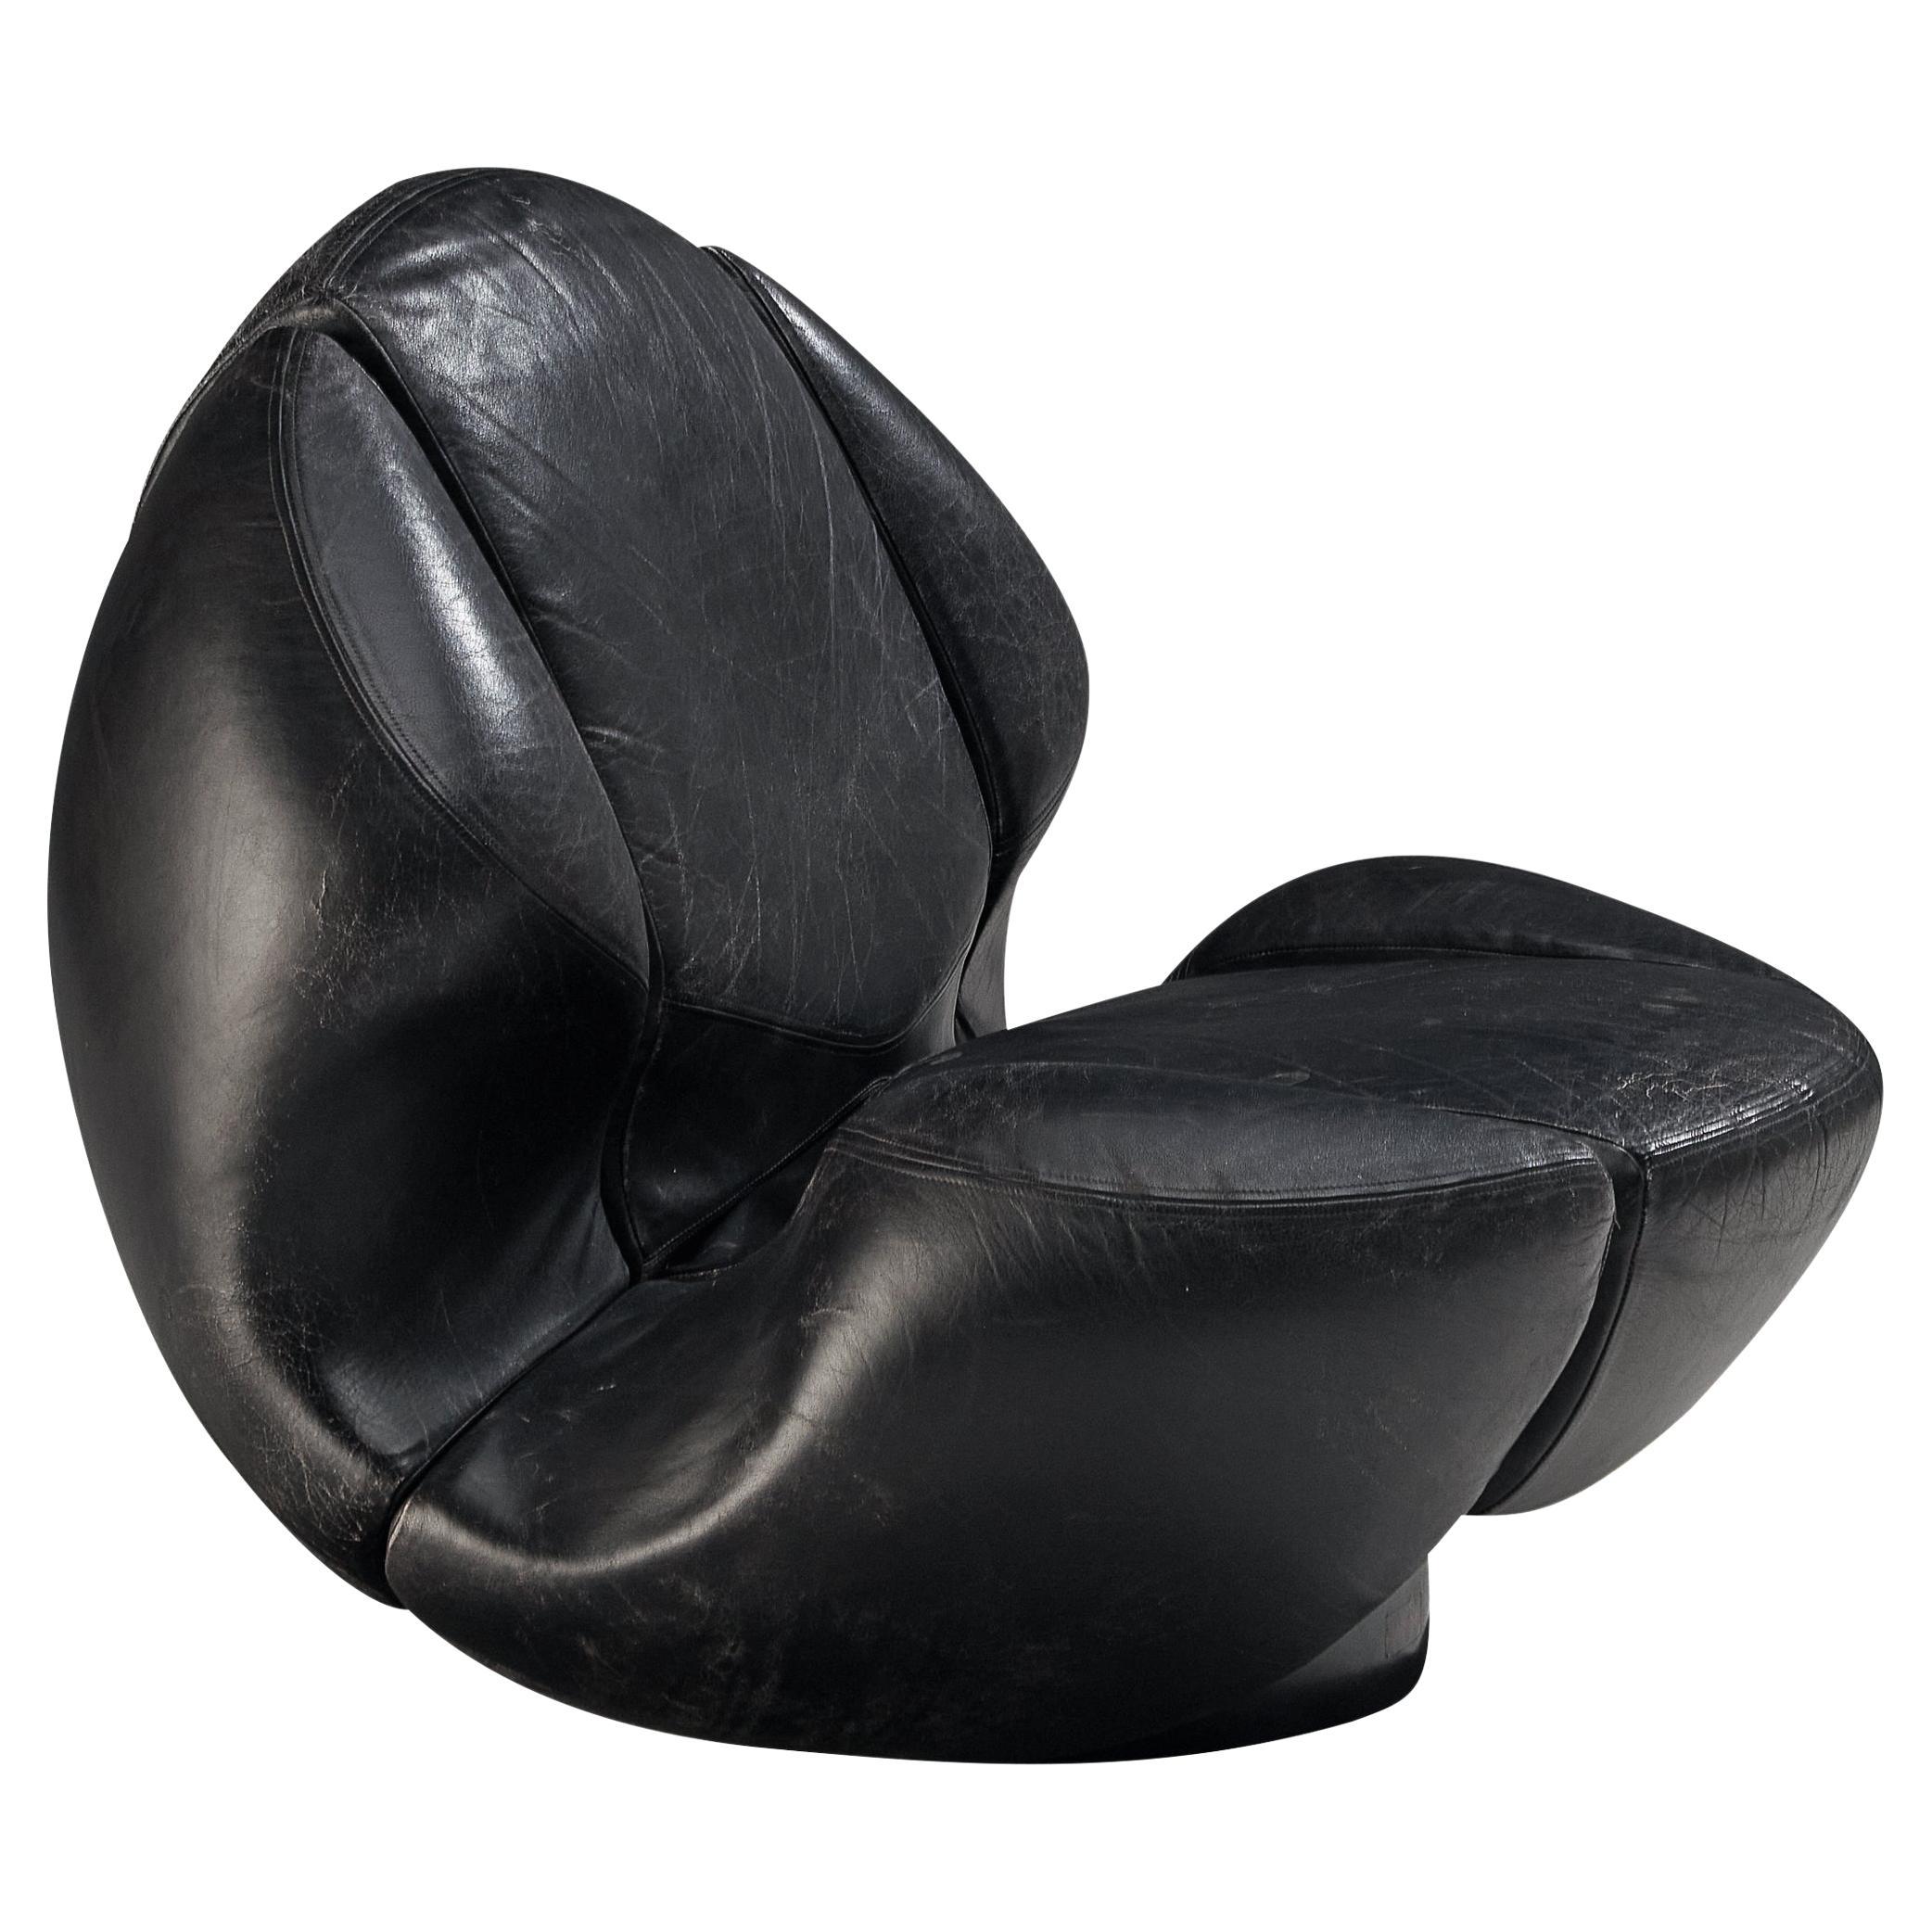 Mario Marenco for Comfortline 'Nova' Lounge Chair in Black Leather  For Sale